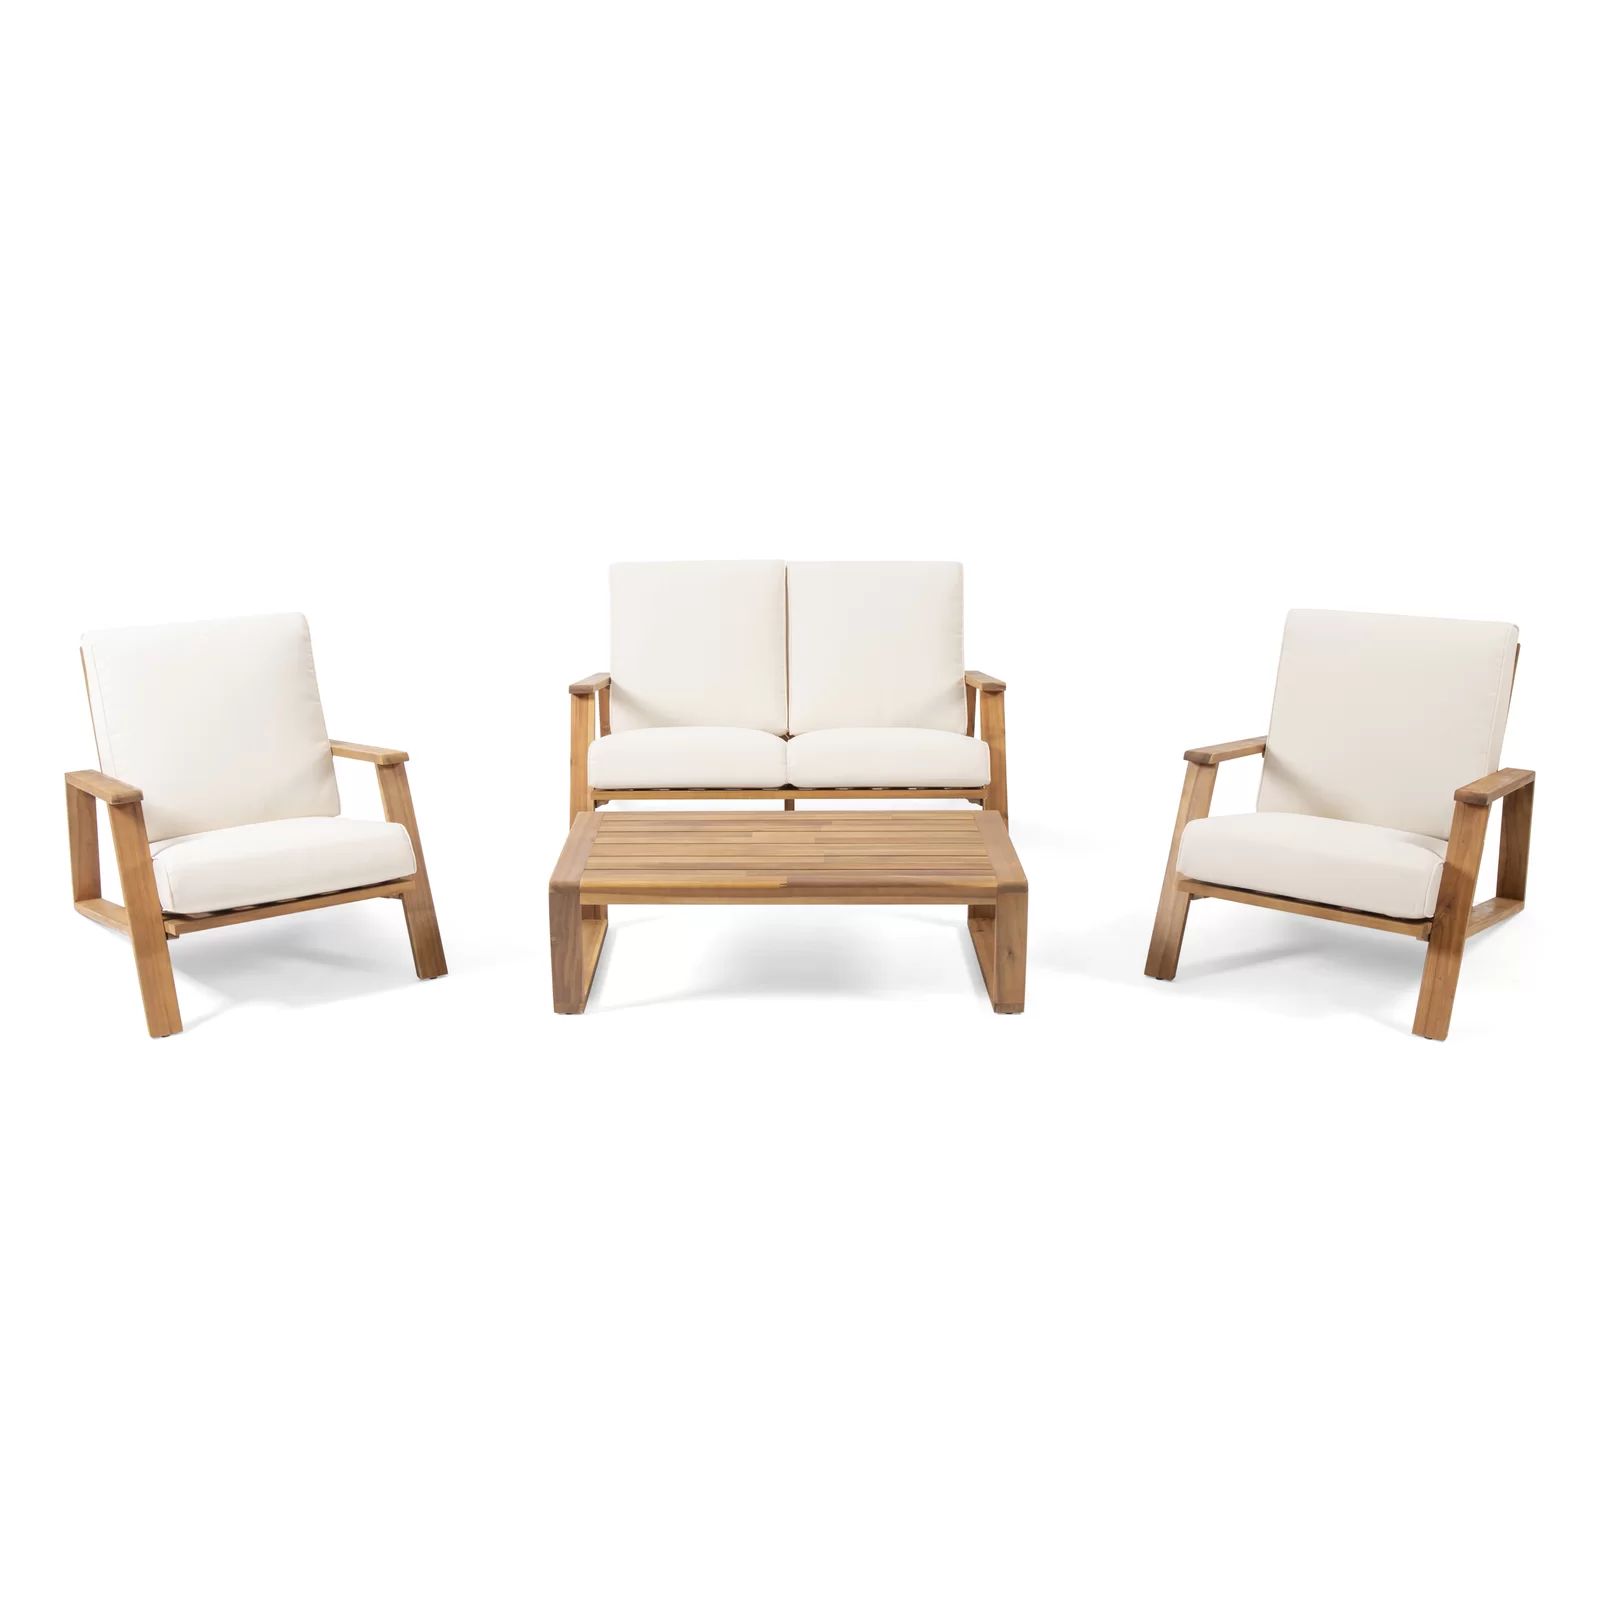 Isham 4 - Person Outdoor Seating Group with Cushions | Wayfair North America